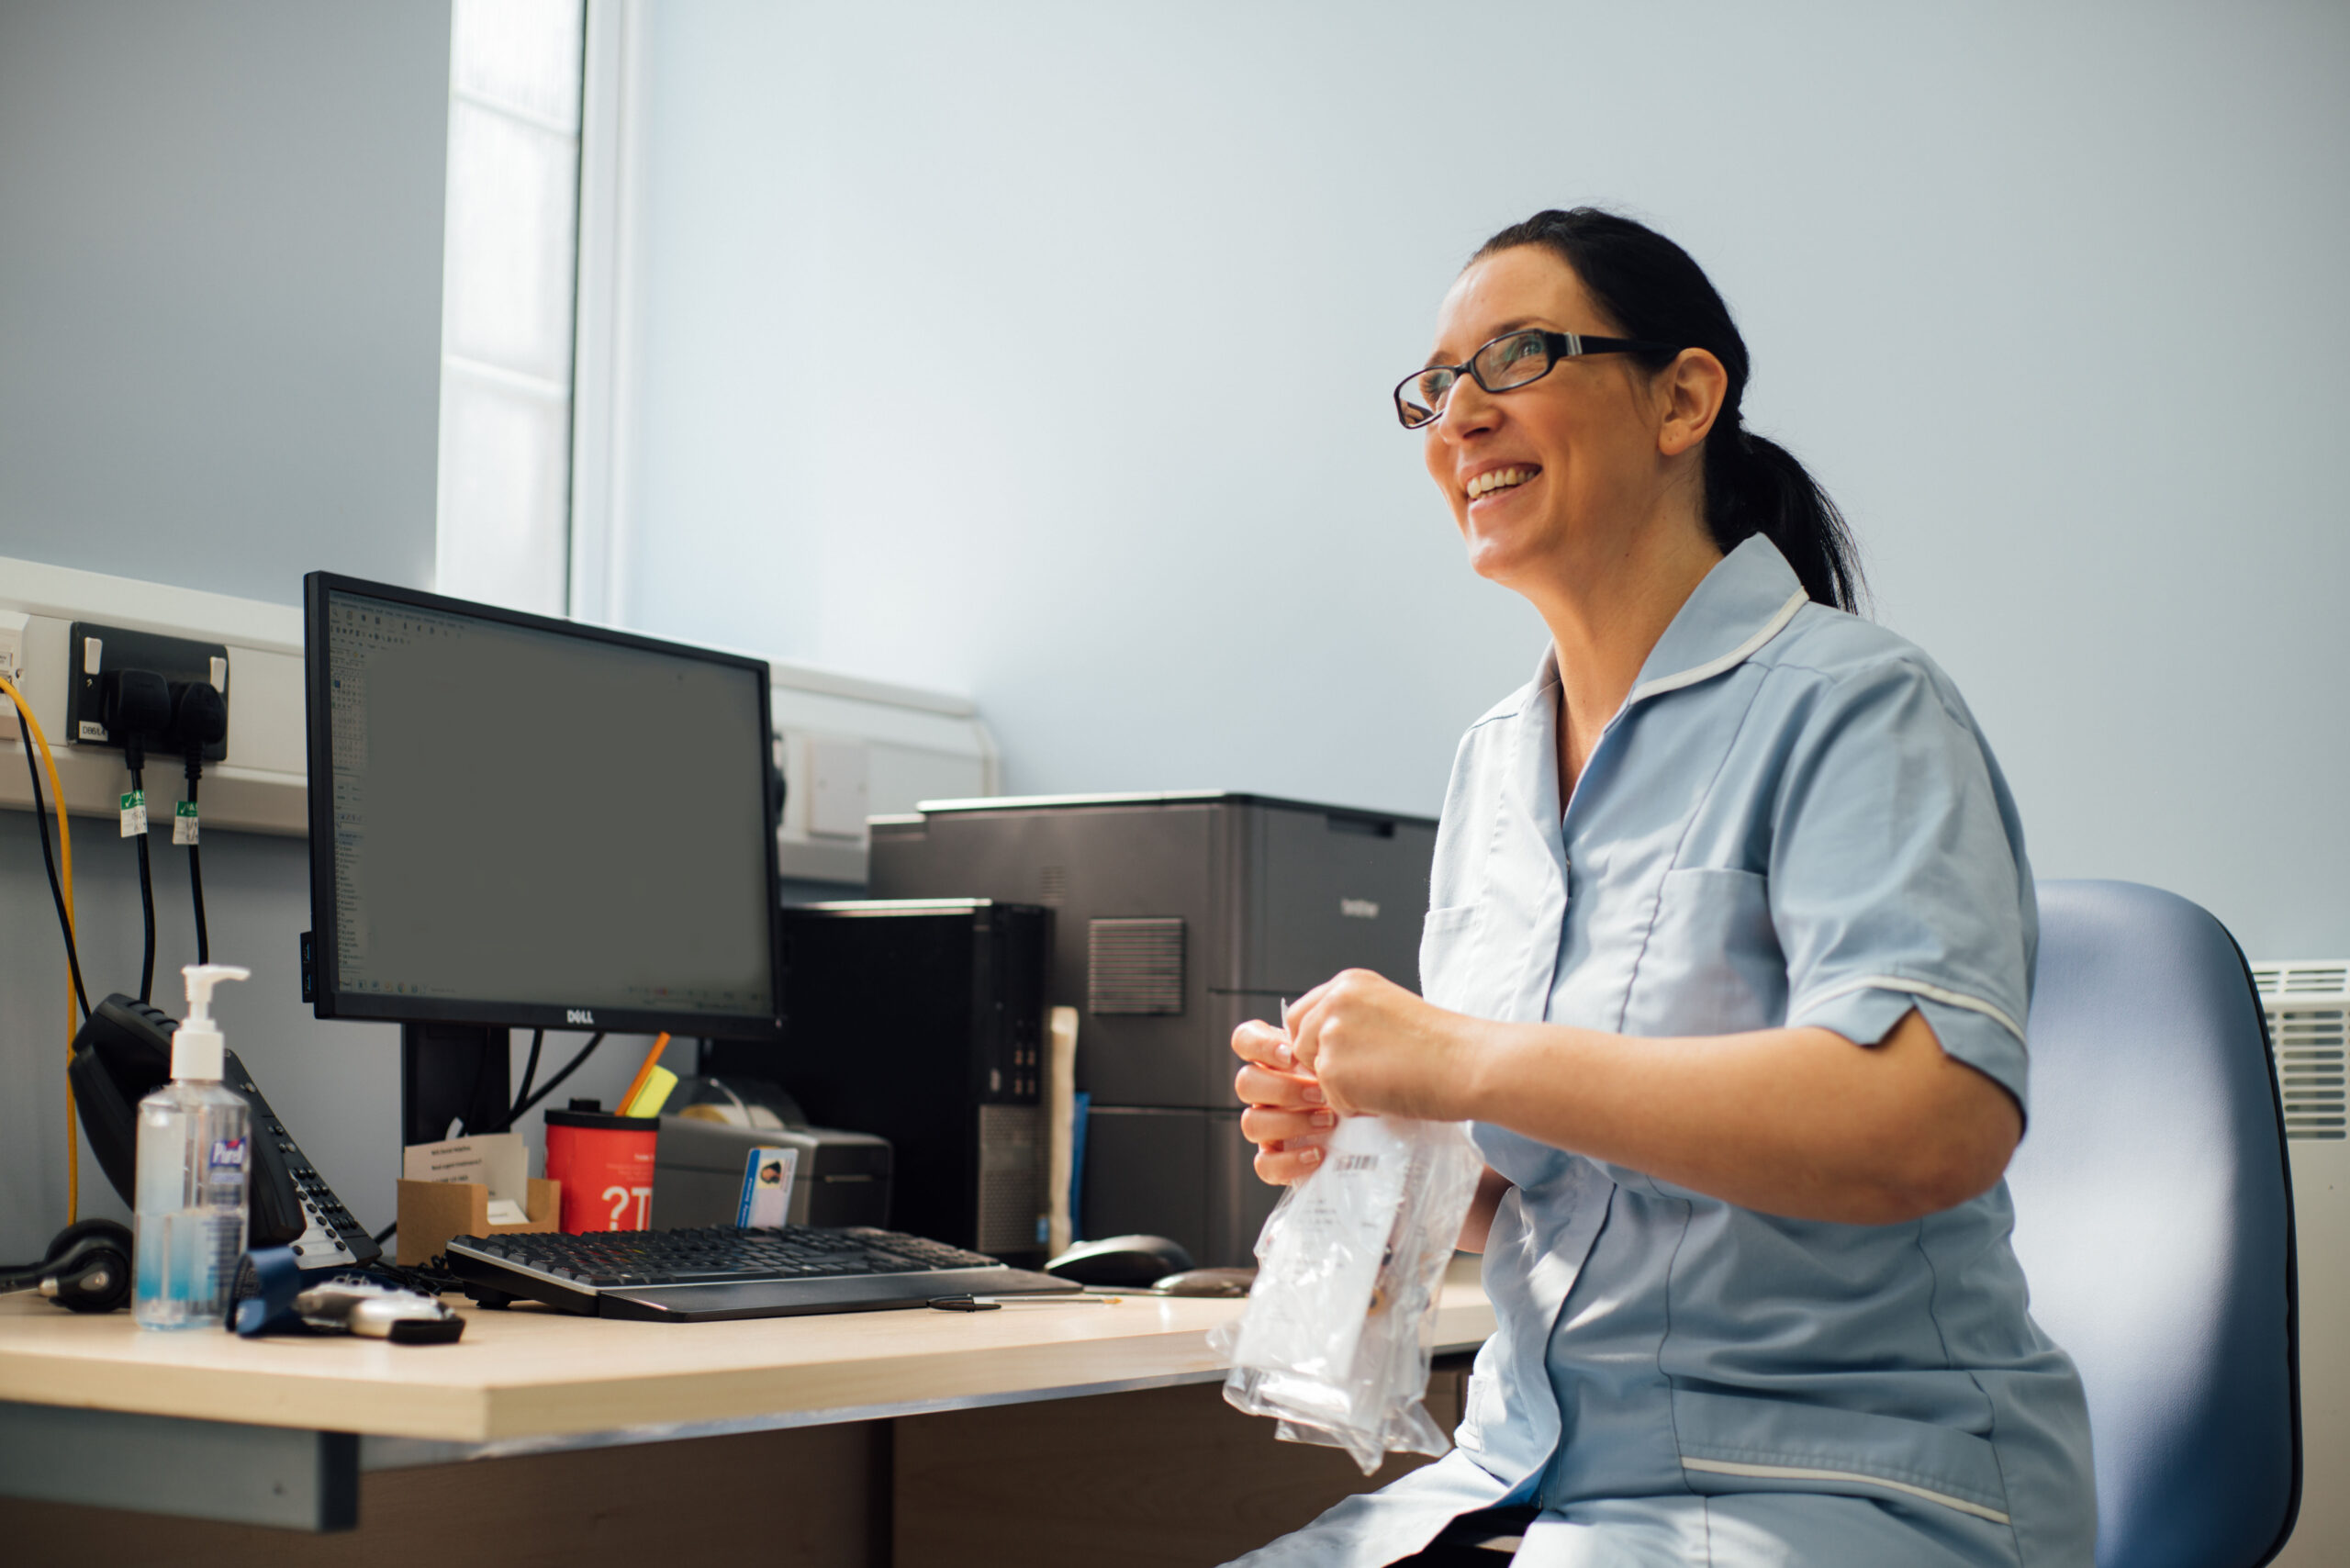 Arch healthcare assistant sits at her desk